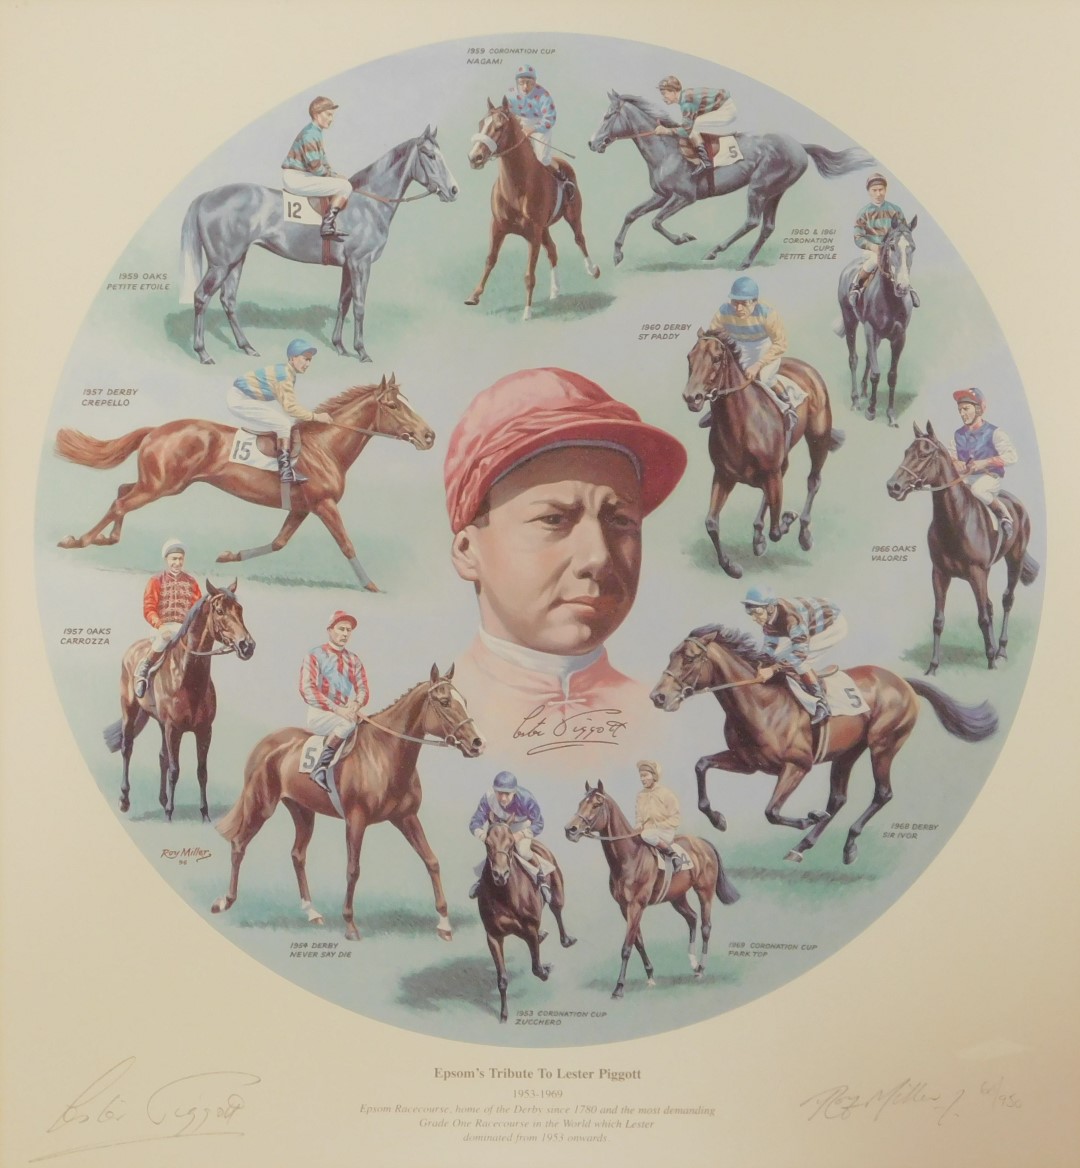 After Roy Miller. Epsom's Tribute to Lester Piggott 1970-1984, signed limited edition print by the - Image 5 of 8